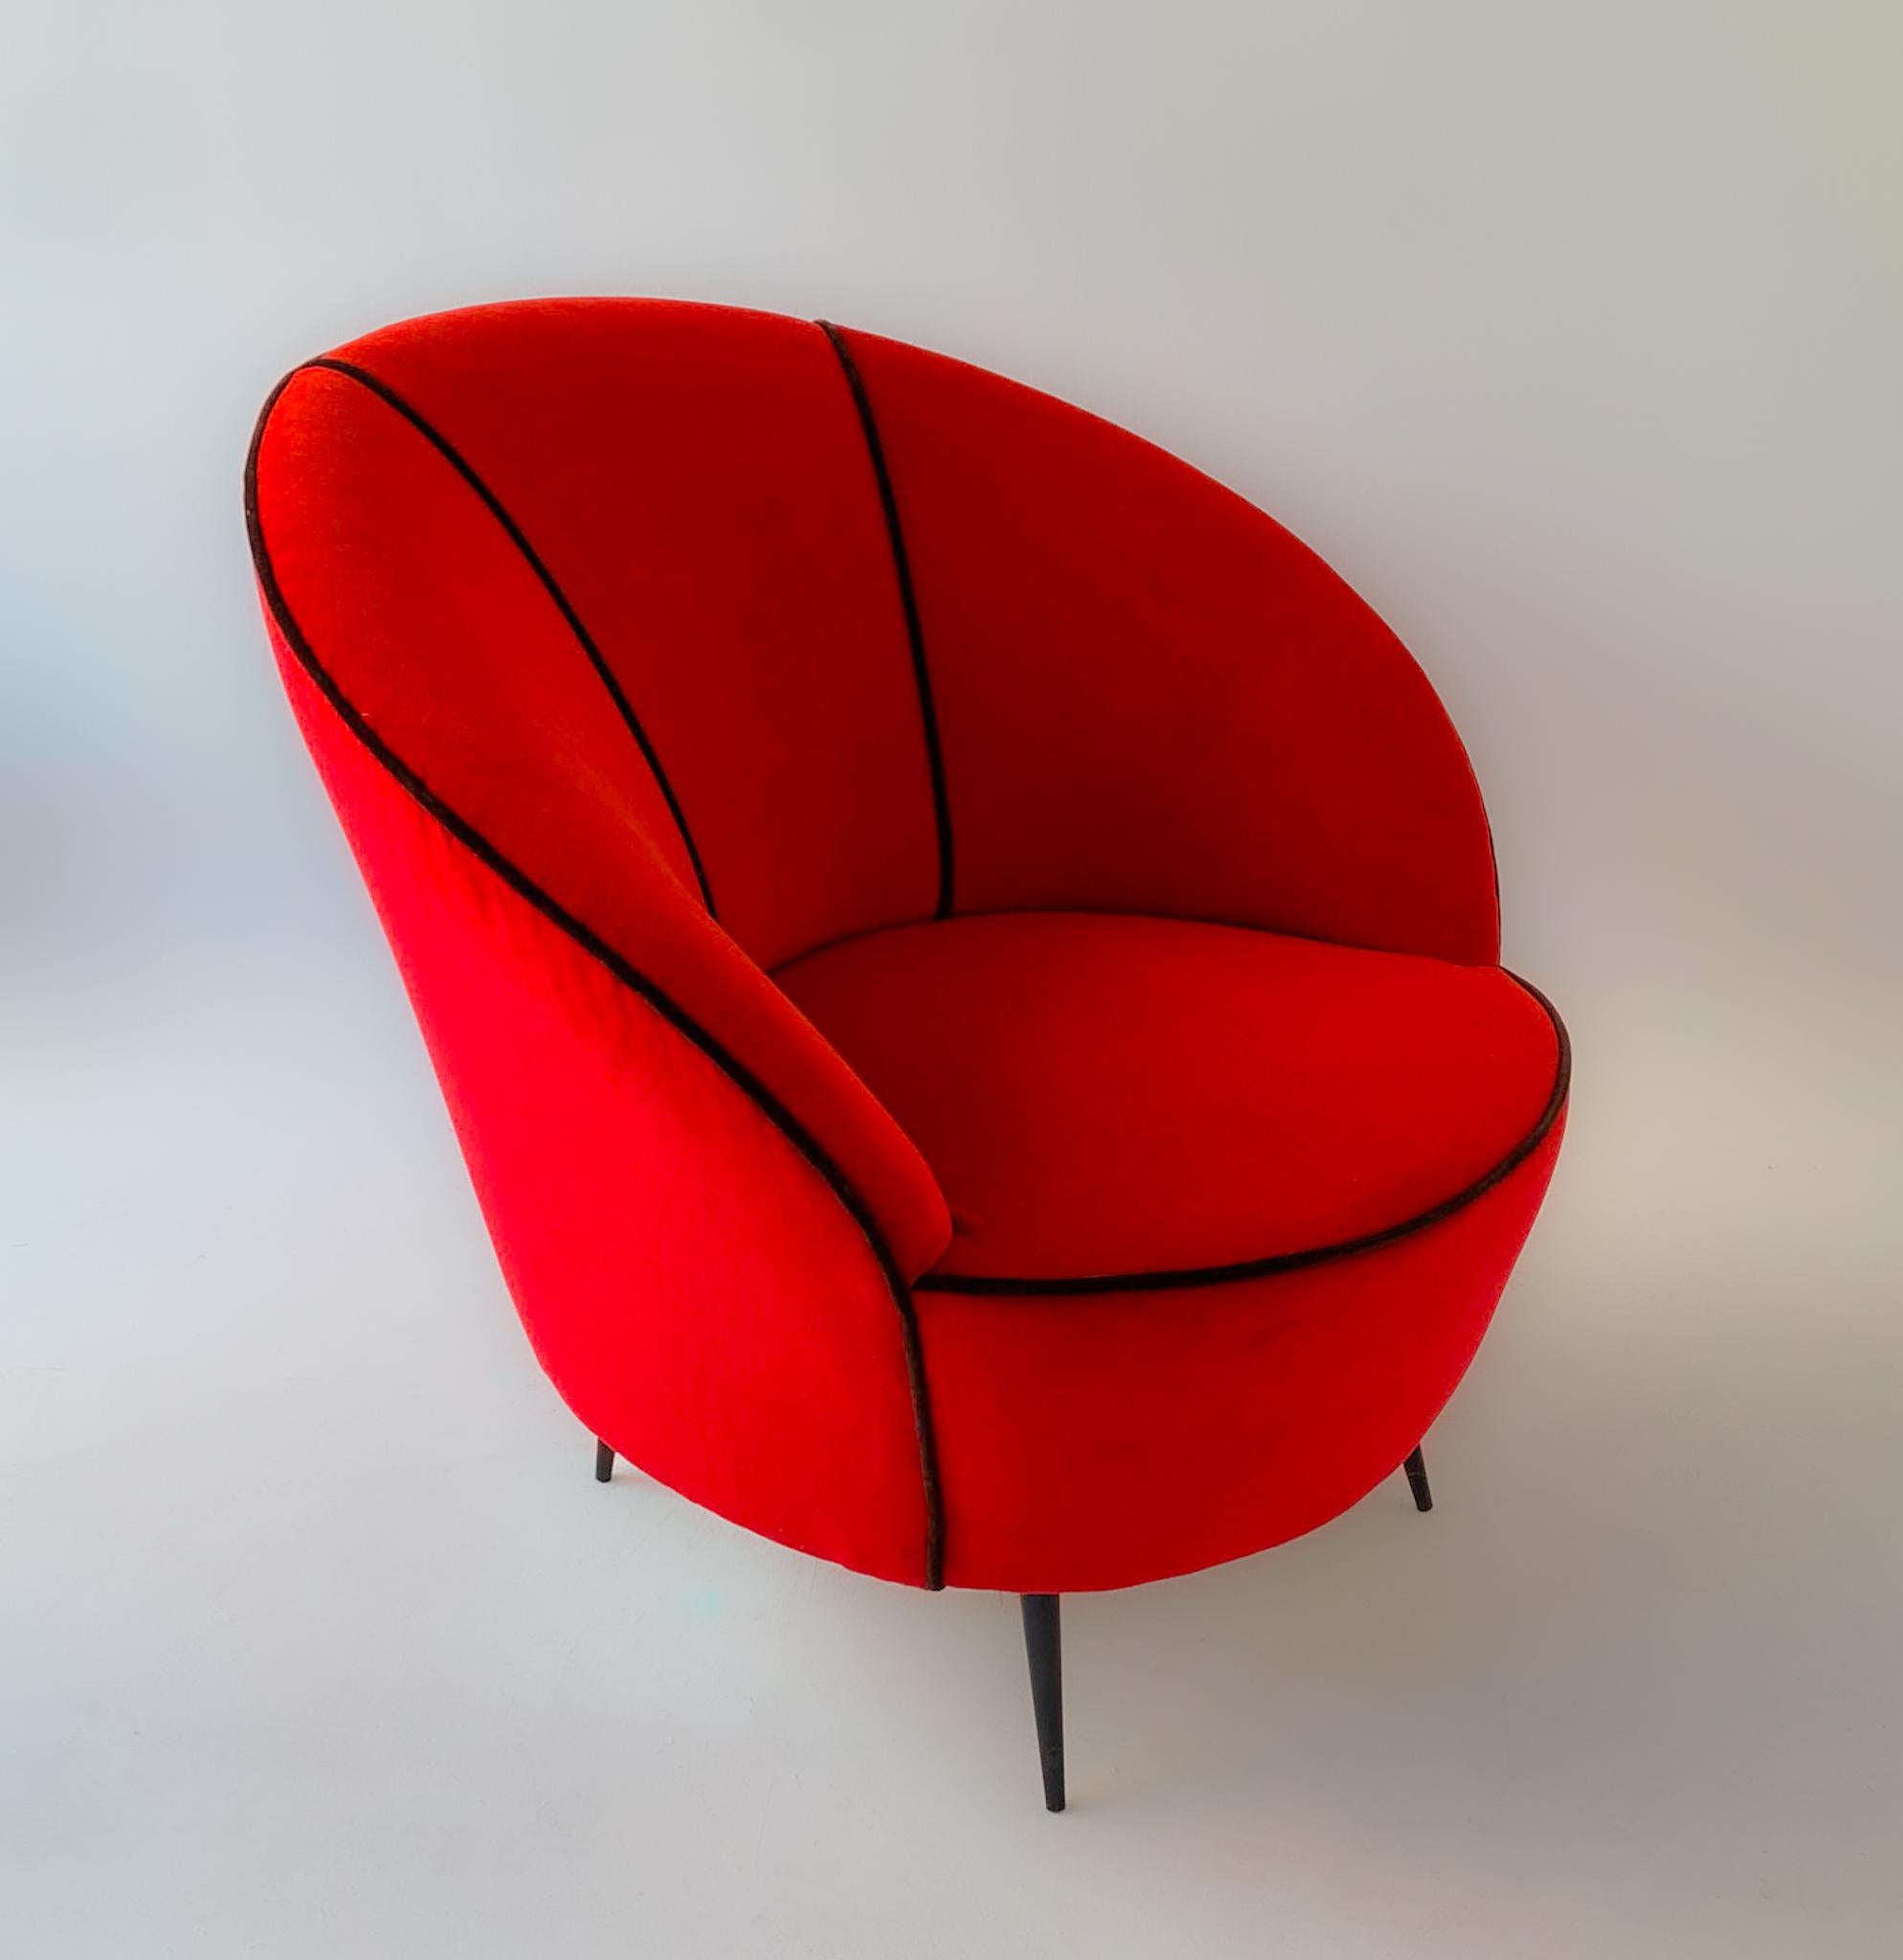 Mid-Century Modern red velvet lounge chairs by Federico Munari, Italy 1950s

This pair of two velvet lounge chairs serves as a true eye-catcher. Their vibrant red colour, black profiles and painted metal legs will add a colourful 1950s touch to